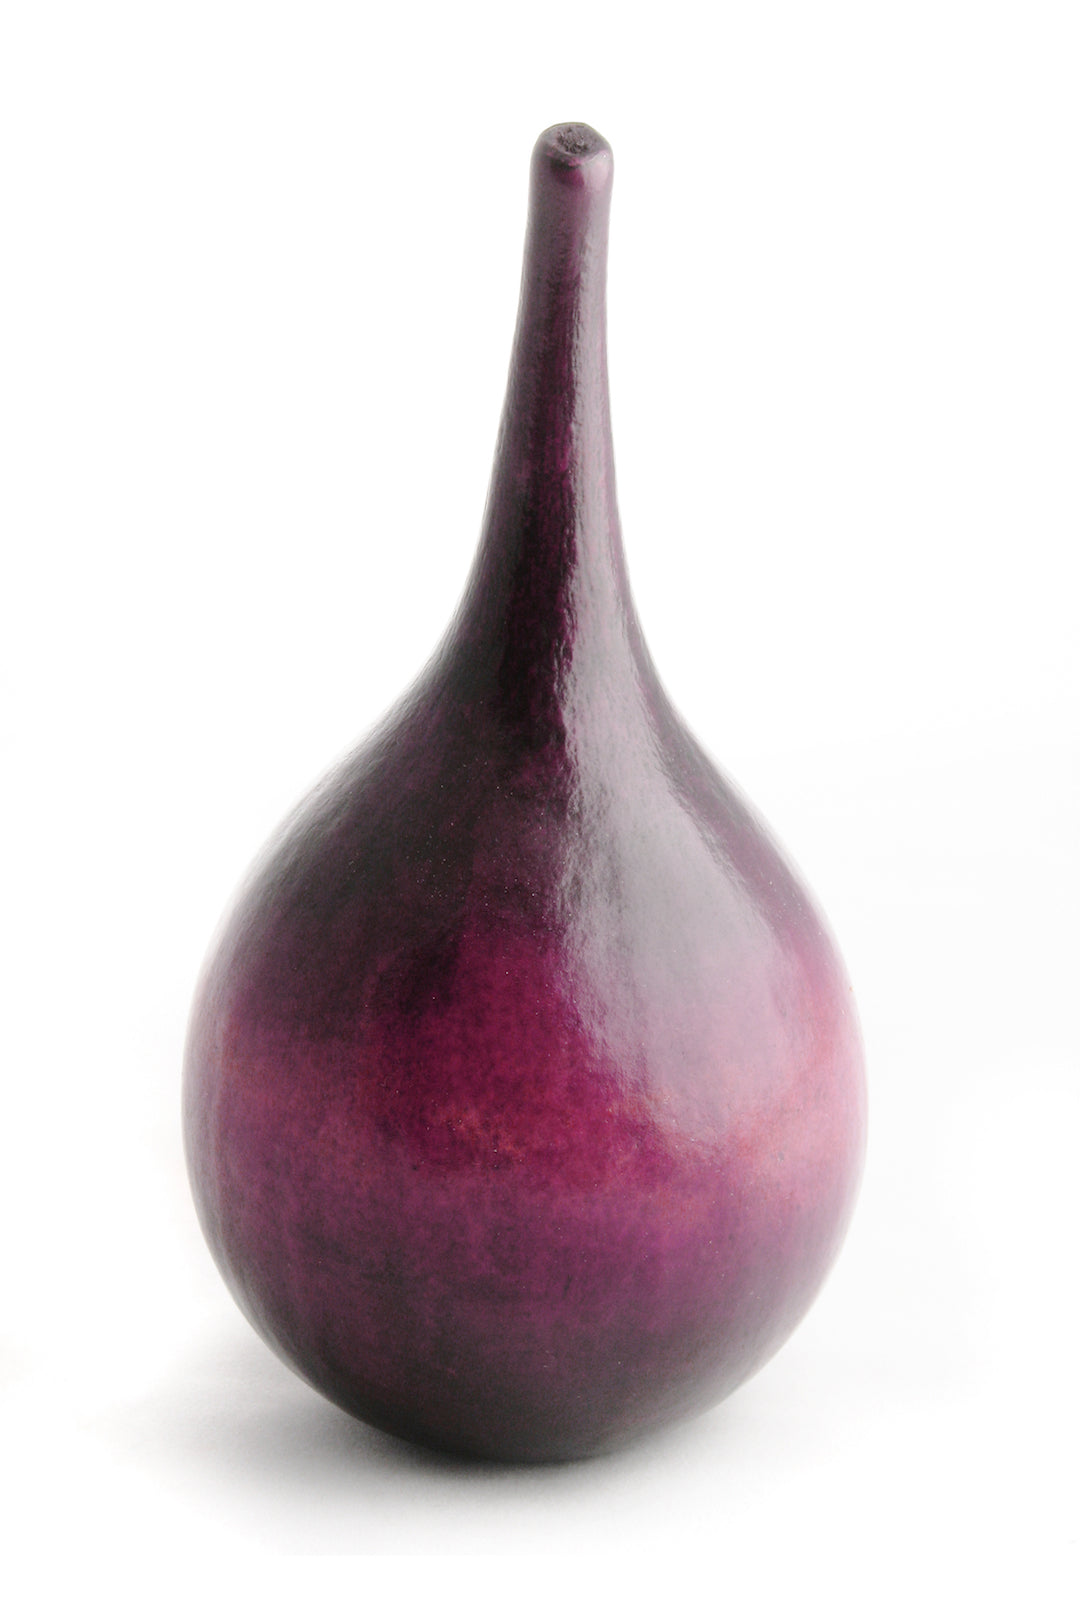 Faded Plum Decorative Calabash Gourd from Kenya